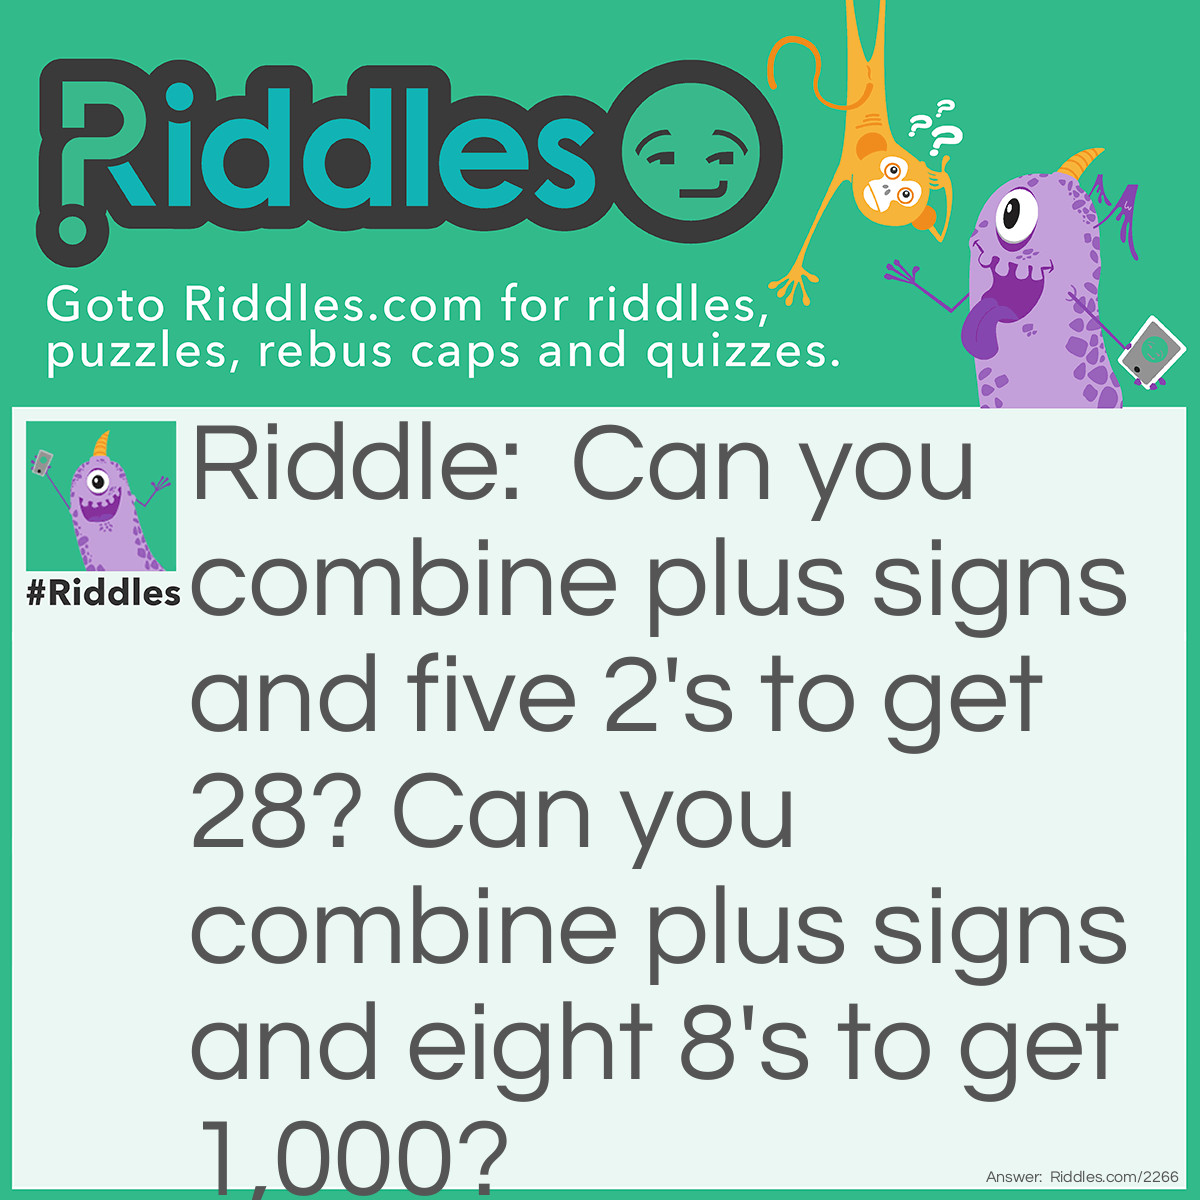 Riddle: Can you combine plus signs and five 2's to get 28? Can you combine plus signs and eight 8's to get 1,000? Answer: 22+2+2+2=28; 888+88+8+8+8=1,000